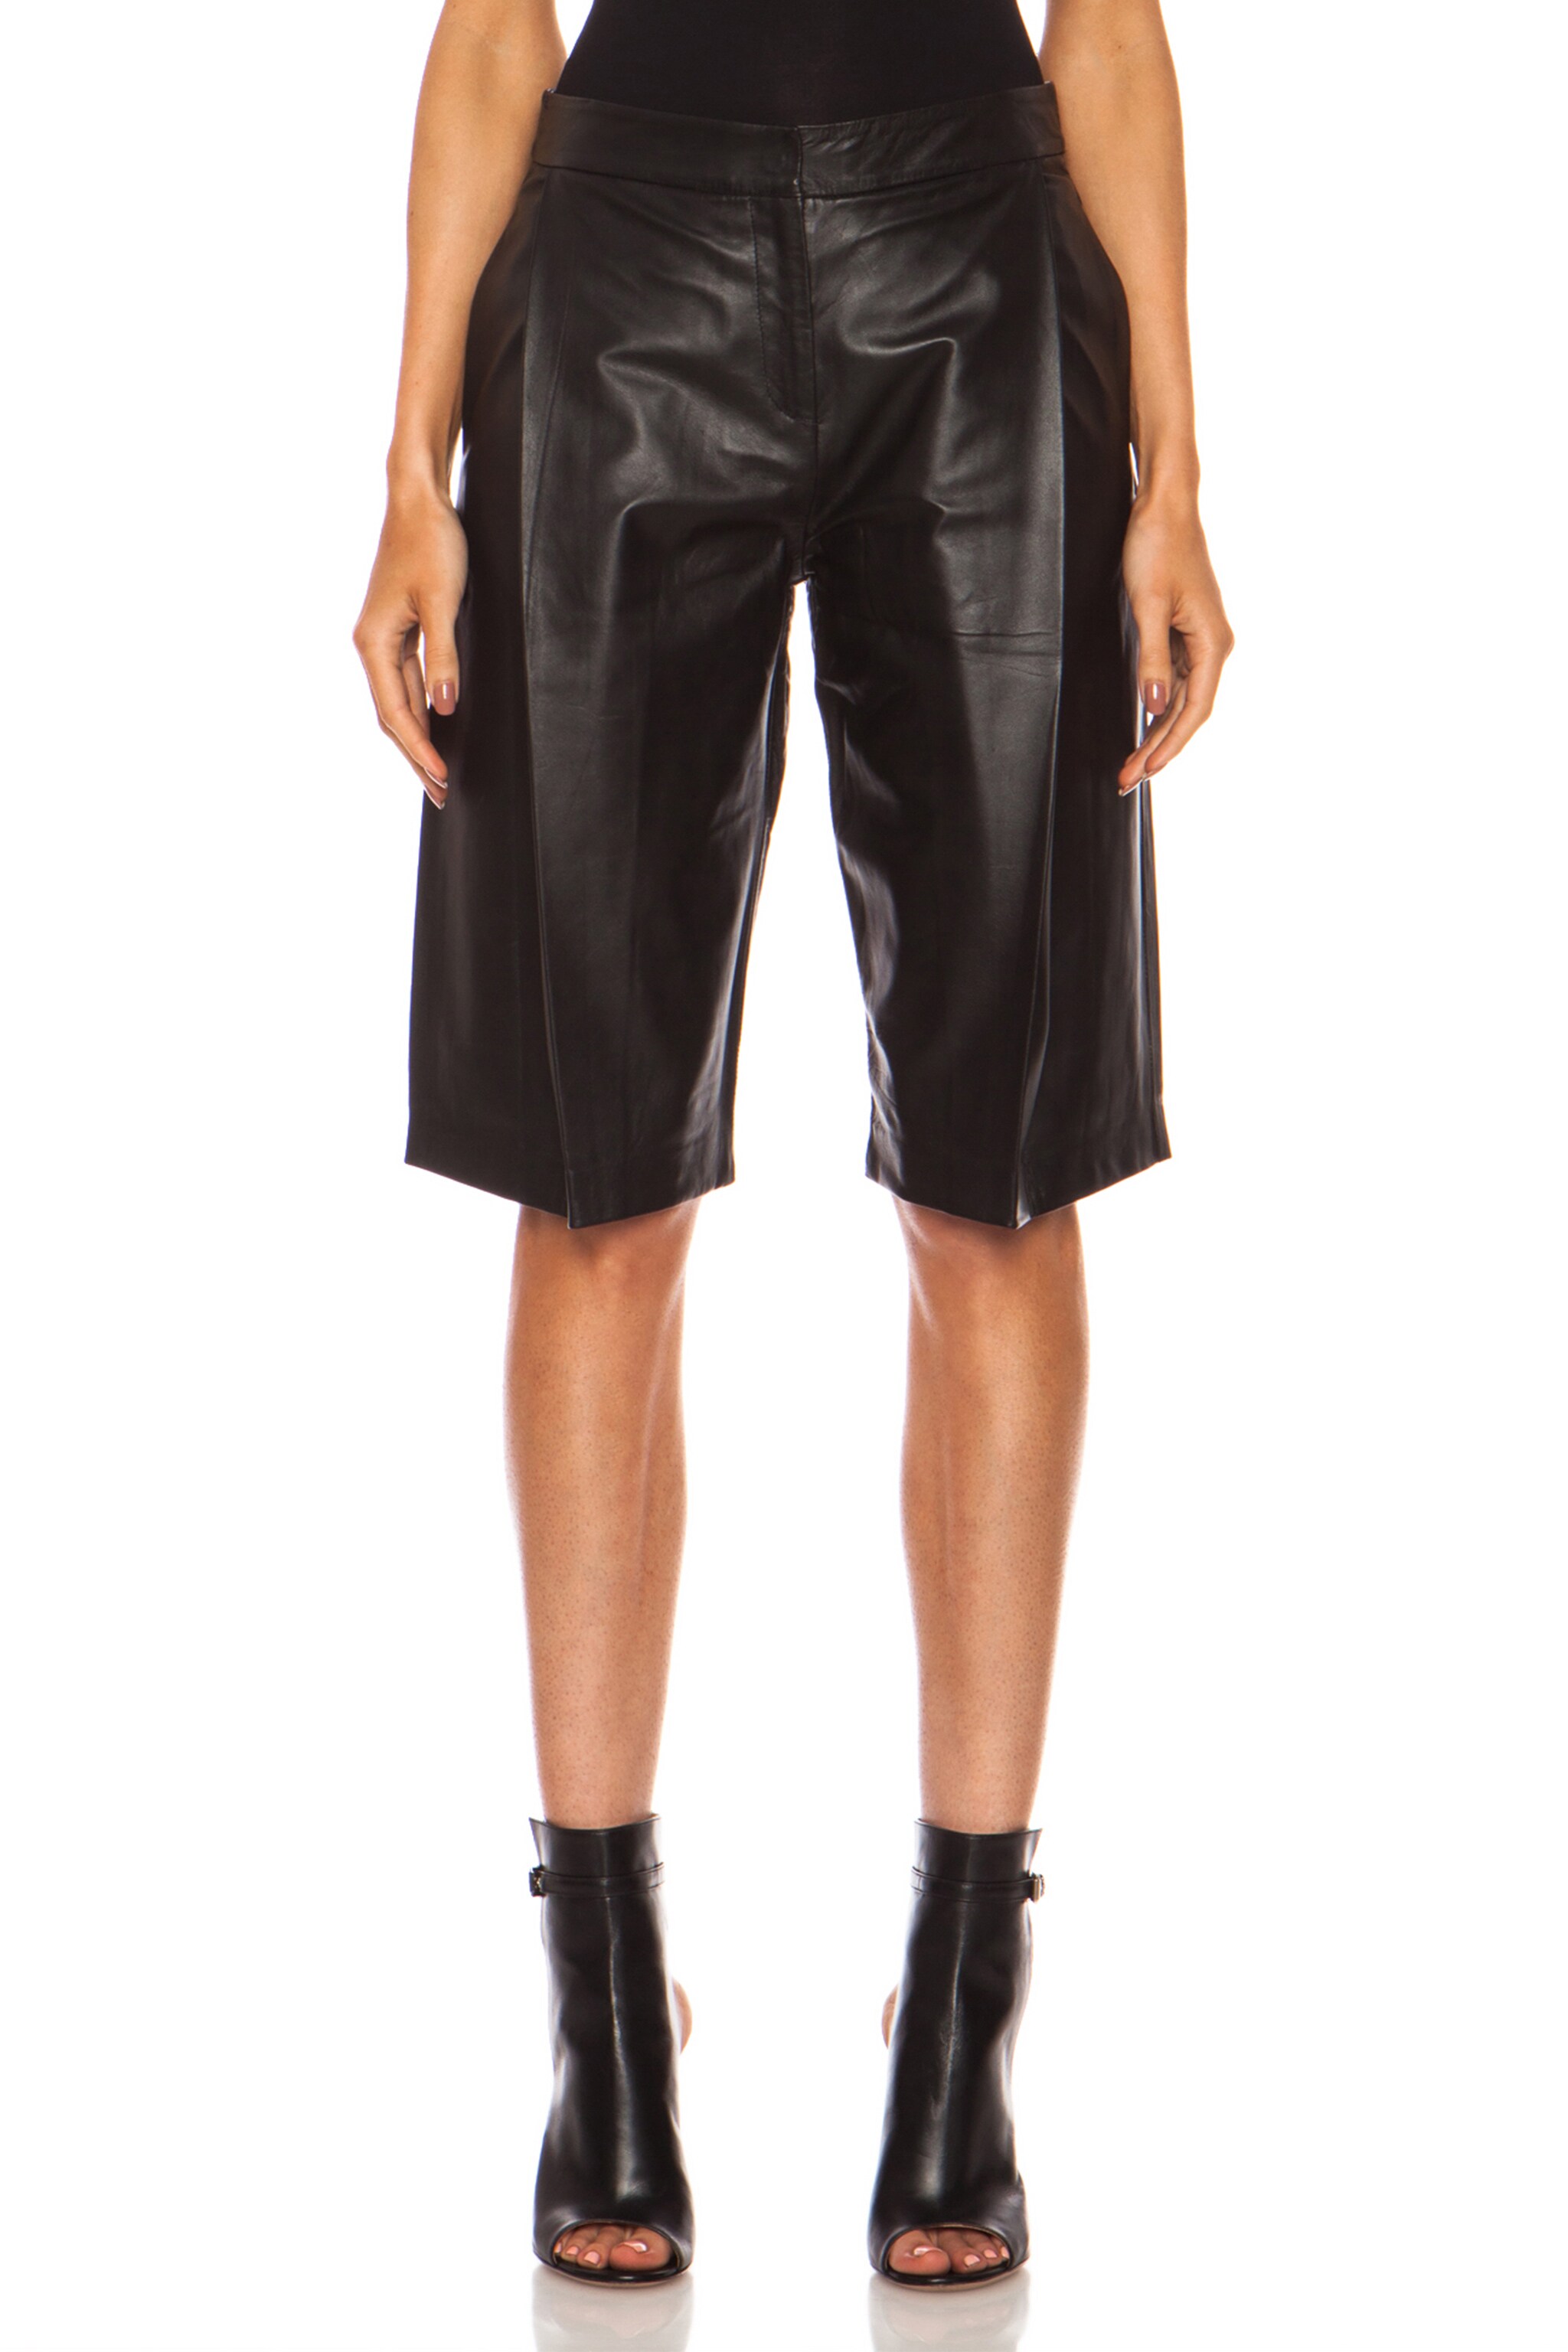 Image 1 of NICHOLAS Tailored Leather Knee Length Leather Short in Black